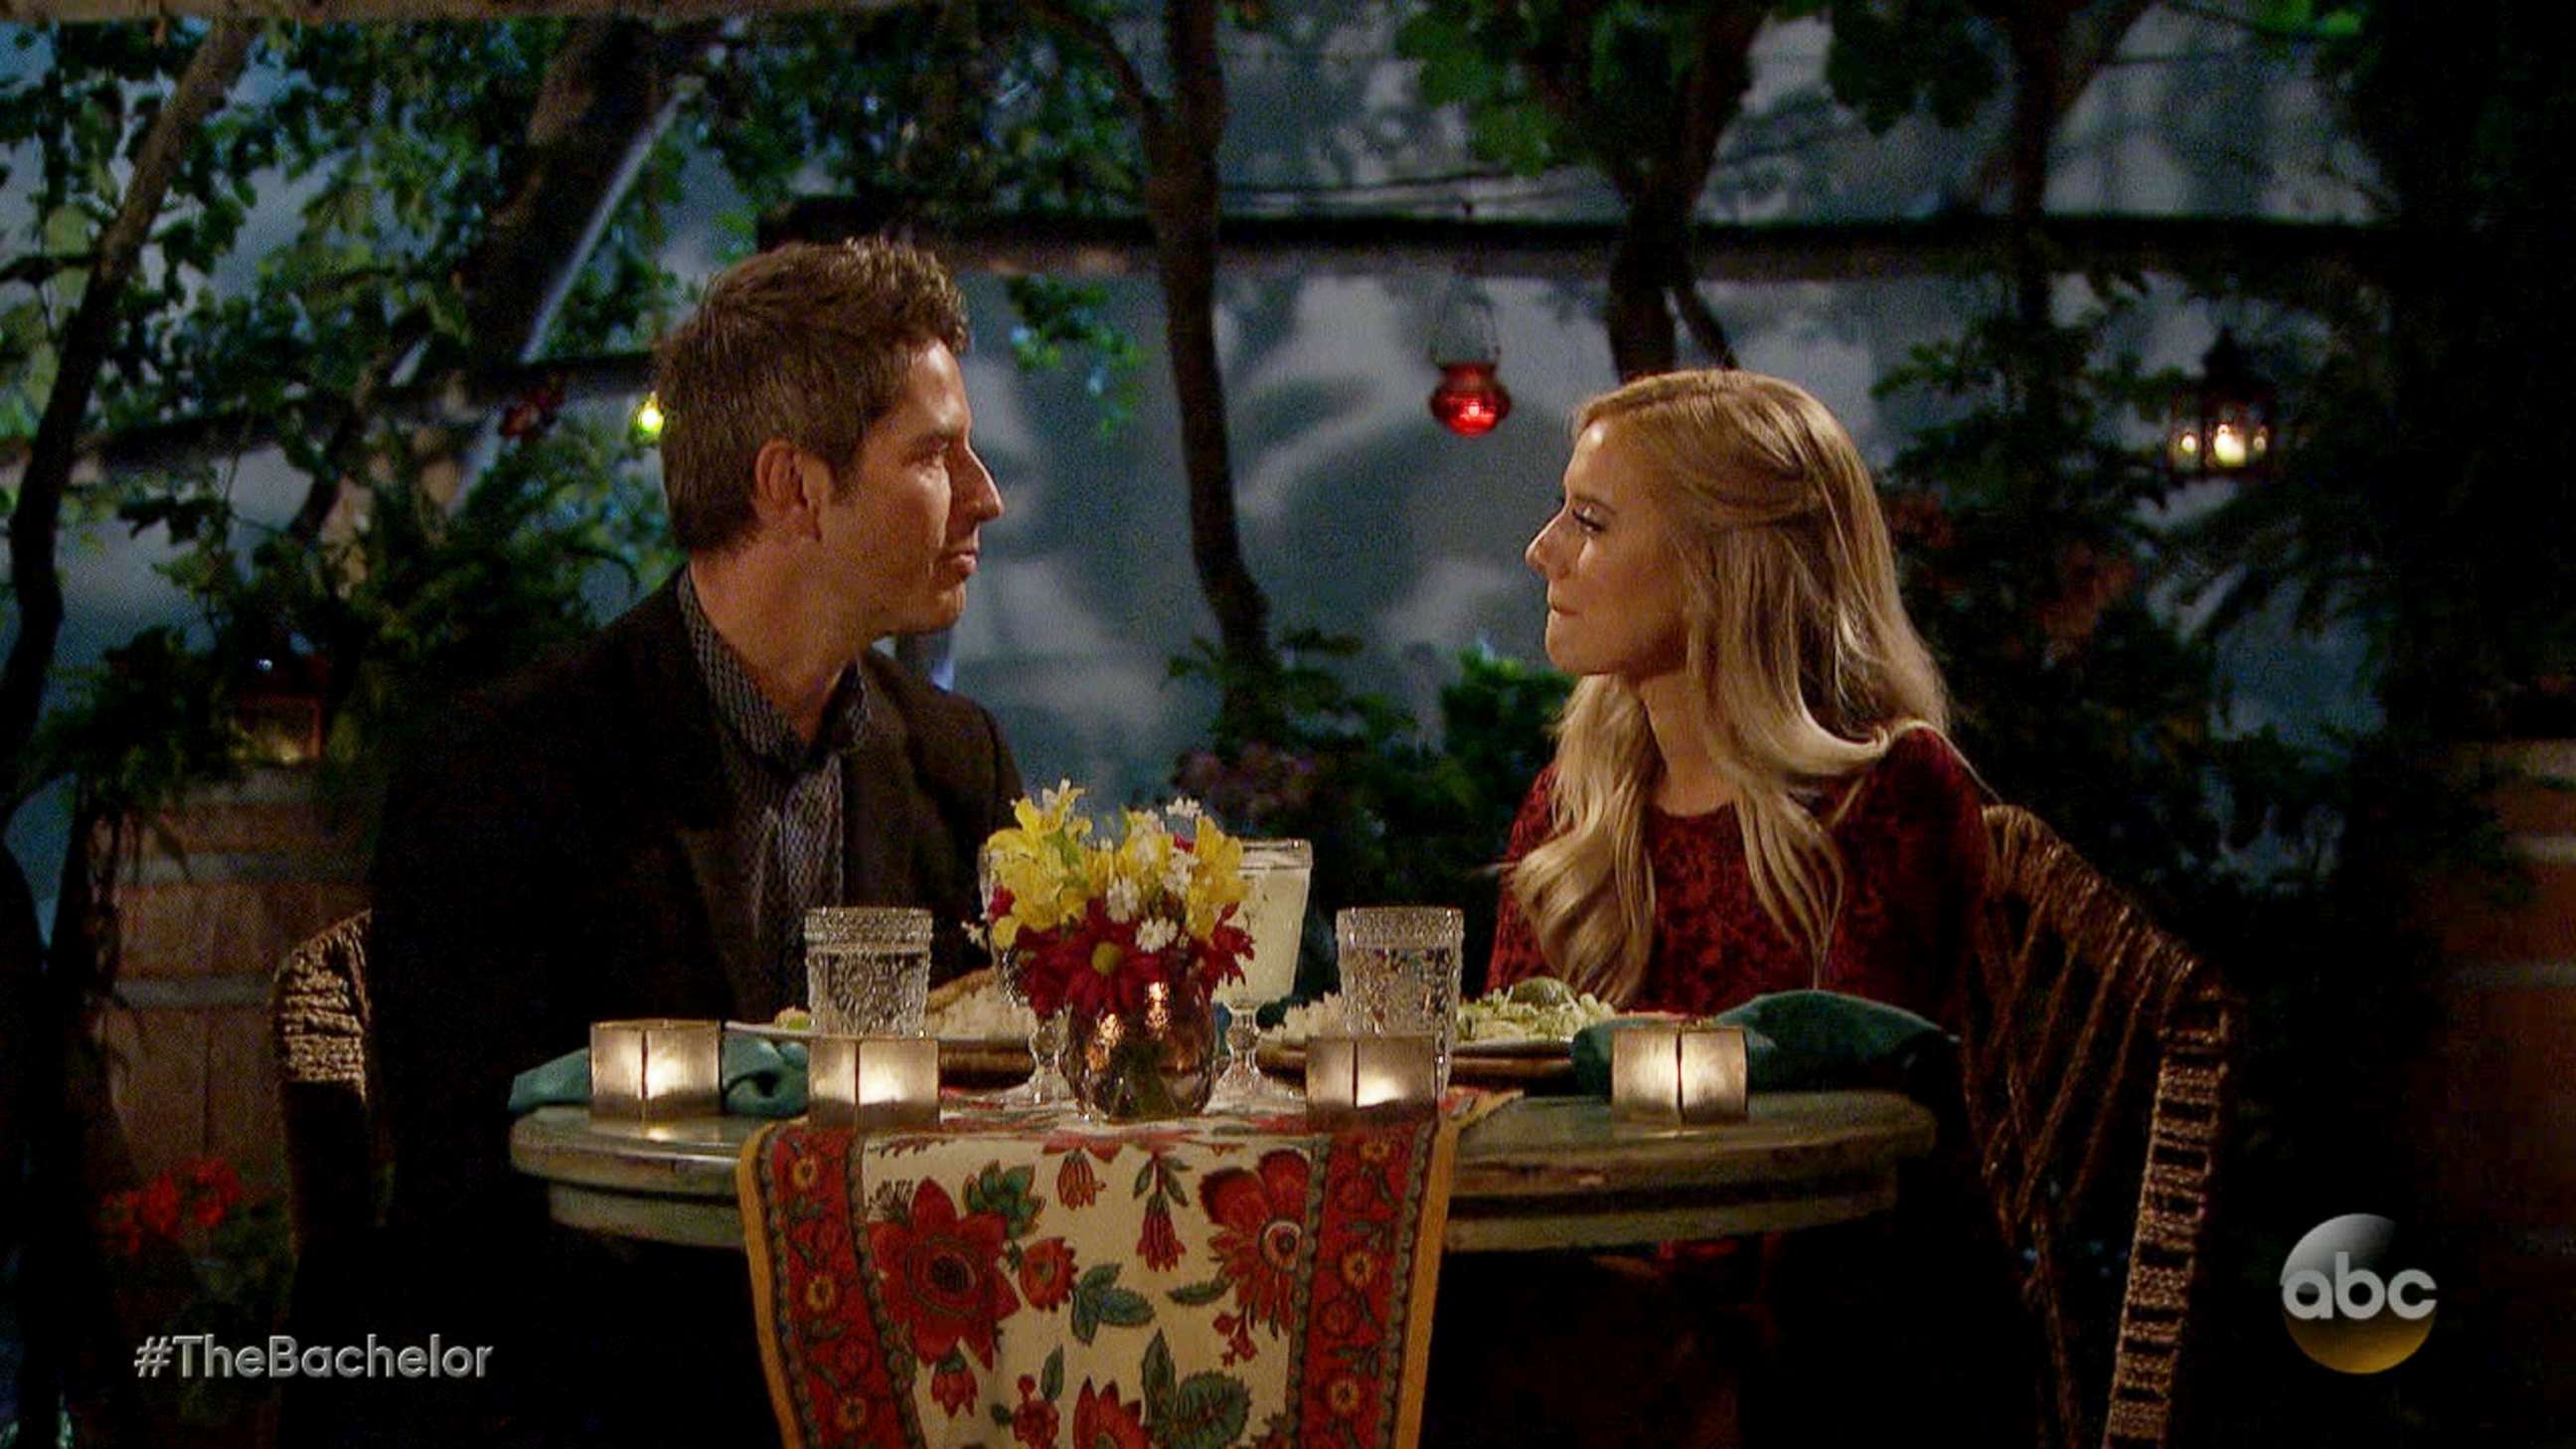 PHOTO: A scene from "The Bachelor" that aired on Feb. 26, 2018.